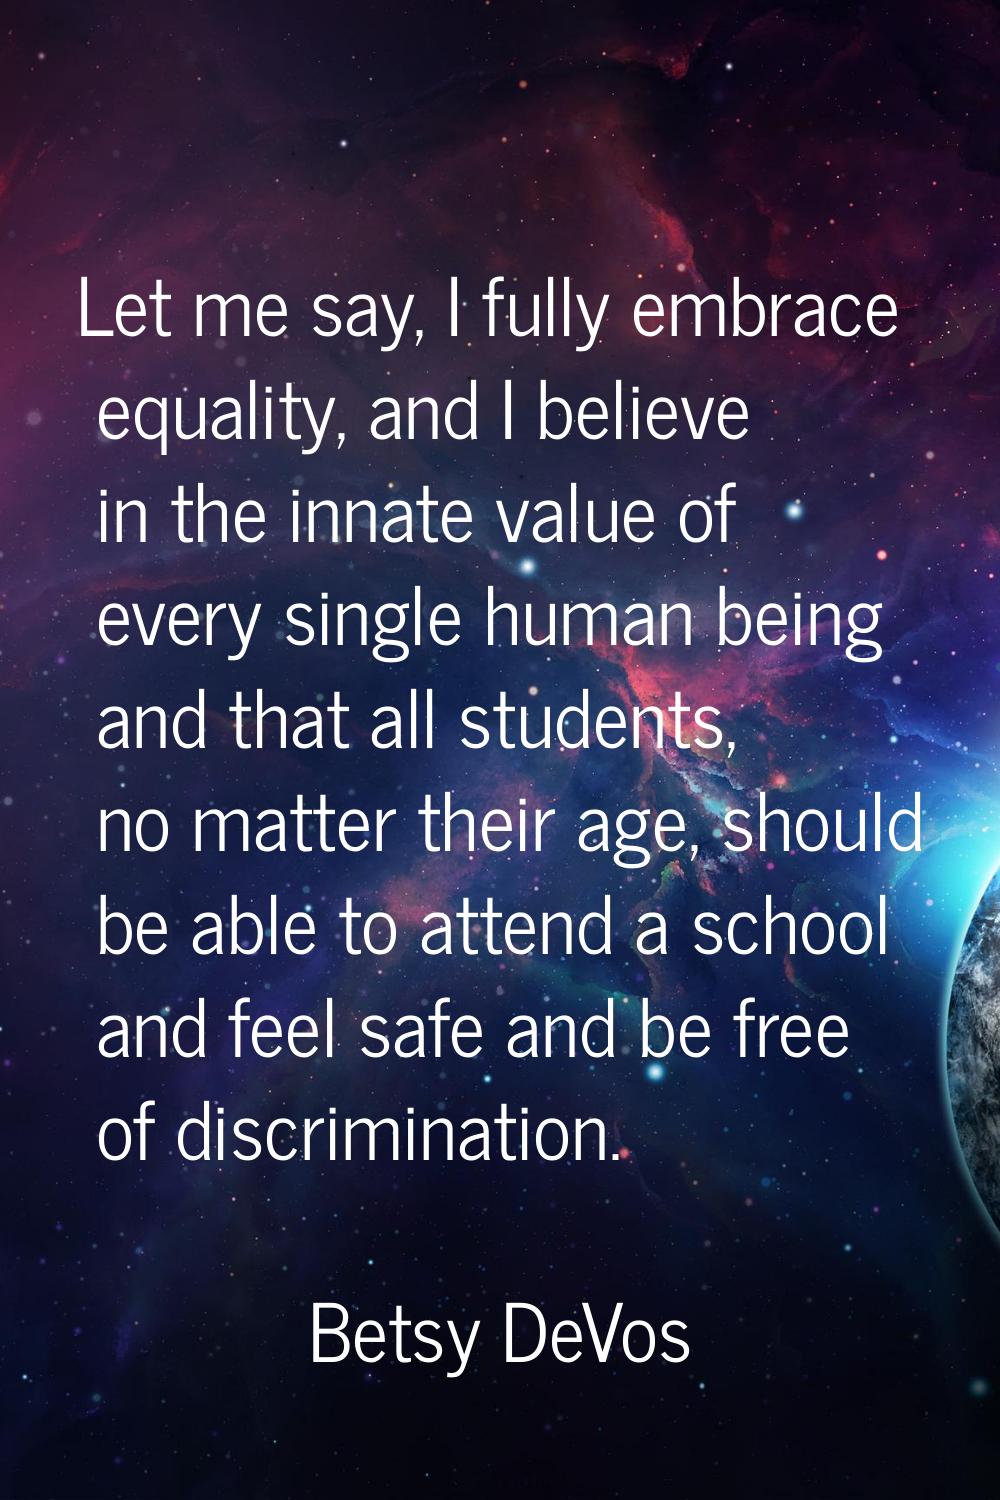 Let me say, I fully embrace equality, and I believe in the innate value of every single human being